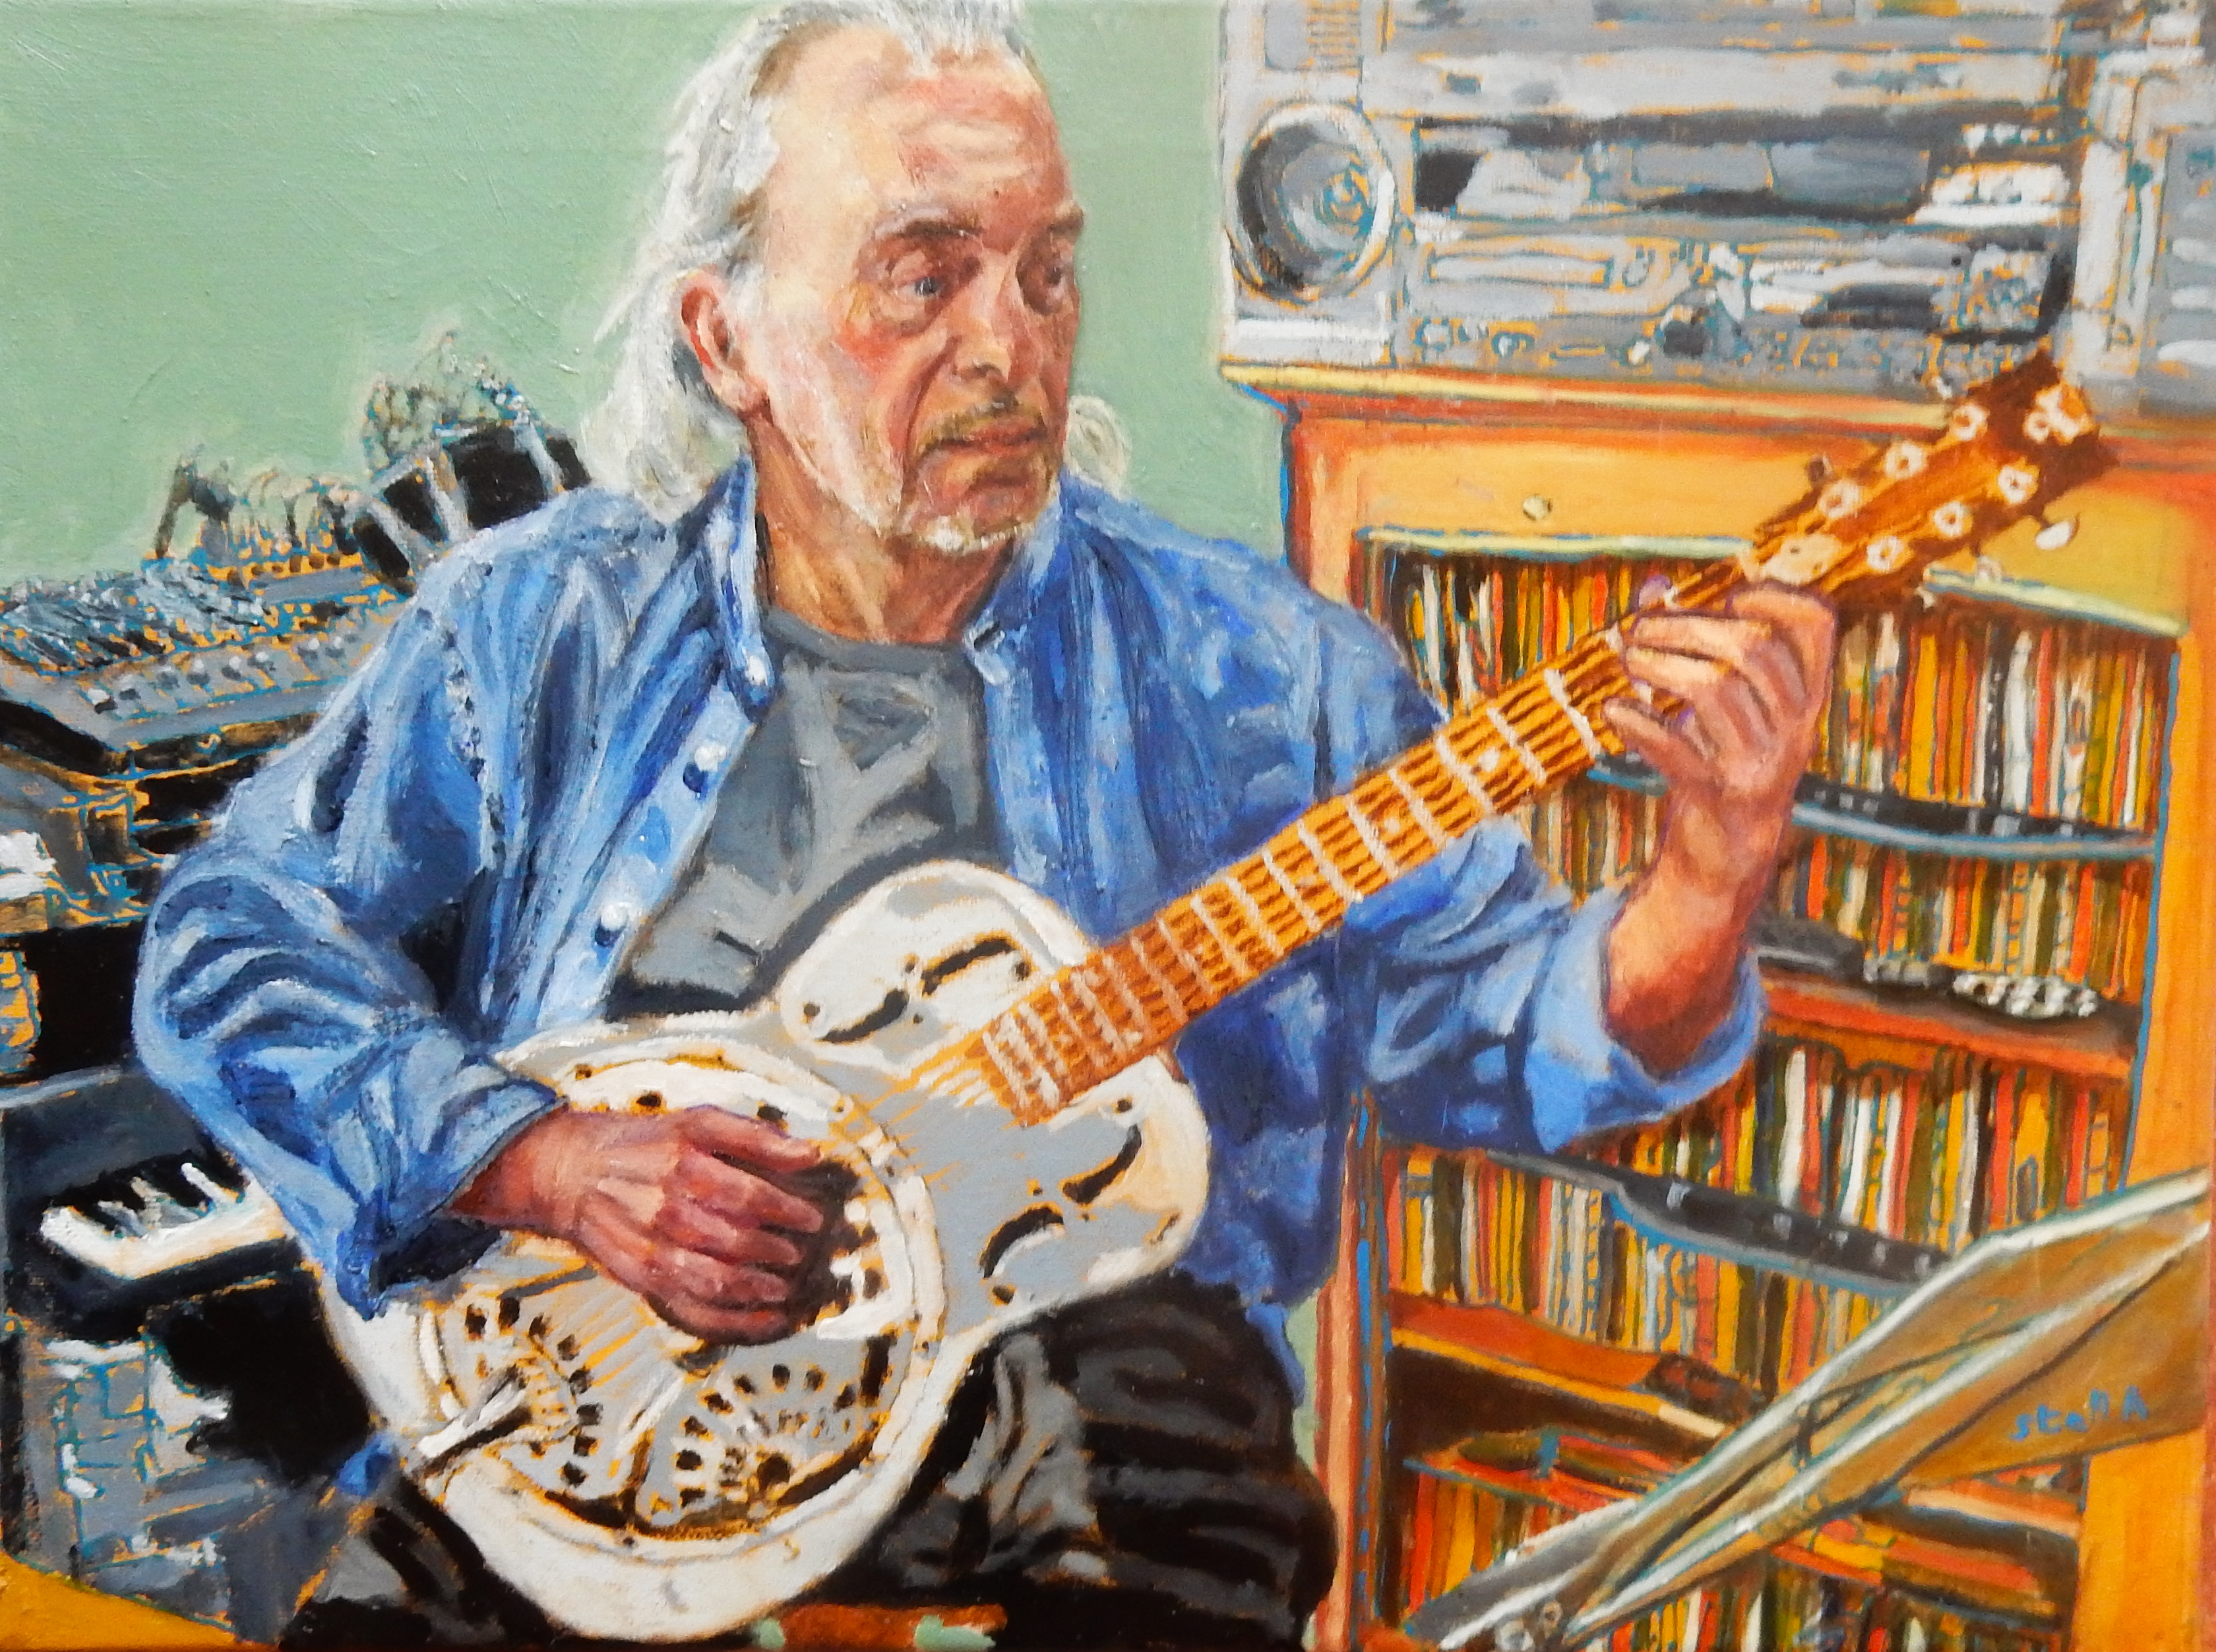 Robert Hokum in lockdown. Oil on canvas by Stella Tooth - now sold.(Image: Stella Tooth)